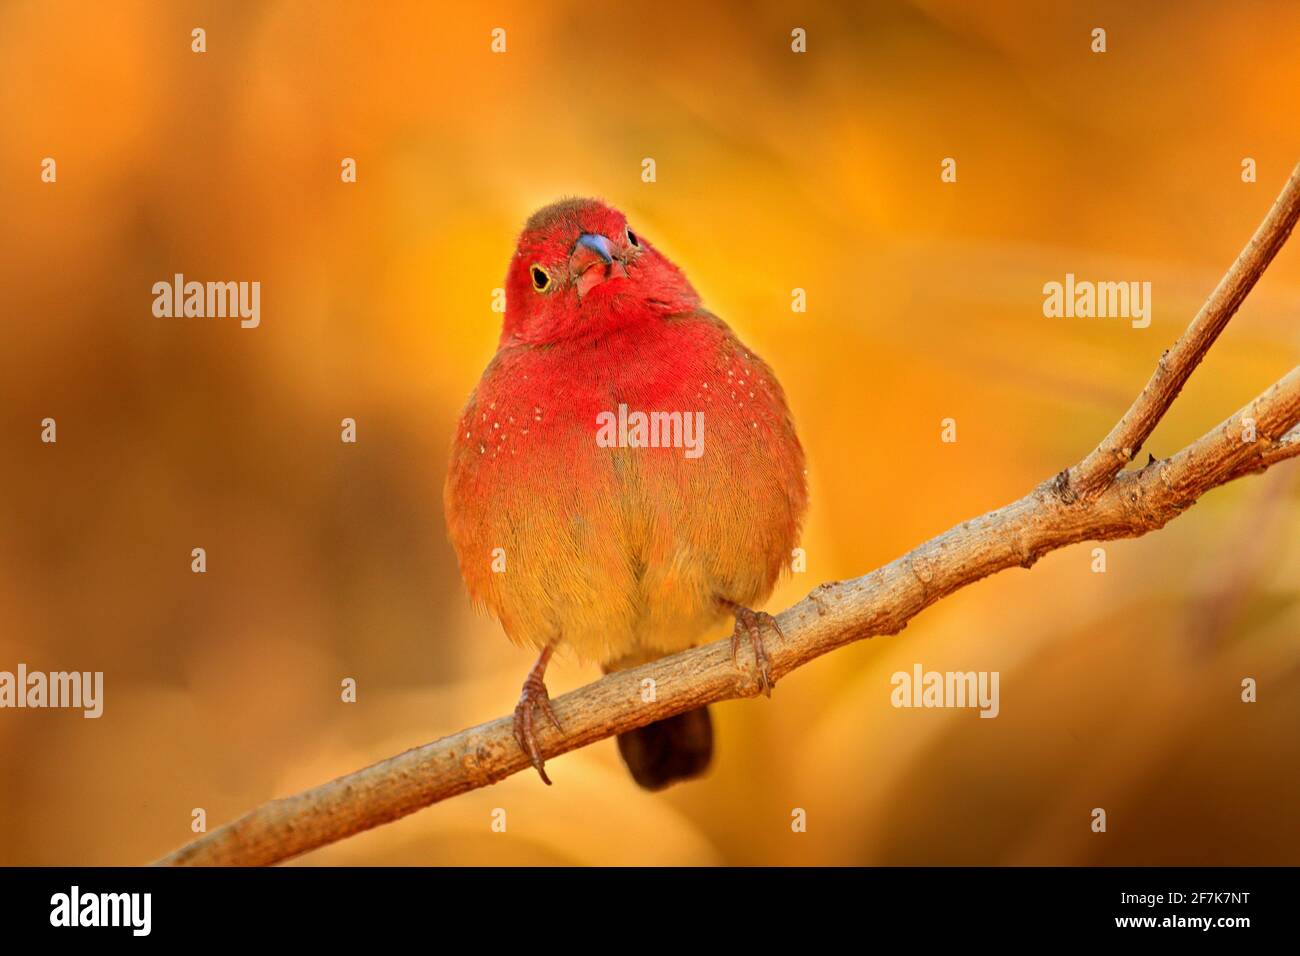 Red-billed firefinch (Lagonosticta senegala) sitting on the branch in nature habitat. Red bird from, Botswana, Africa. Stock Photo